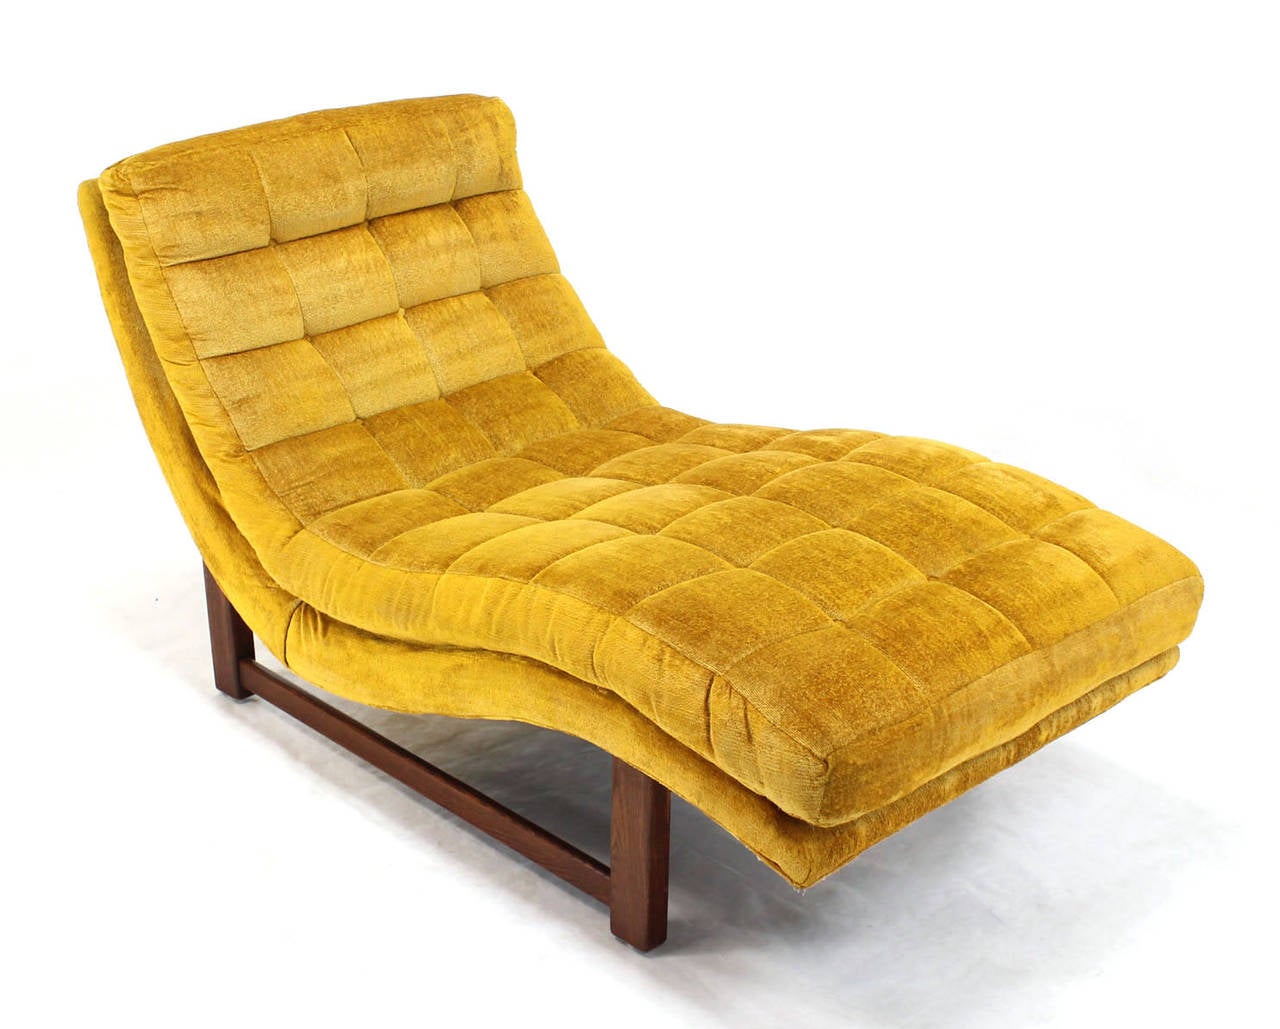 Sharp looking golden velvet upholstery chaise longue possibly designed by Milo Baughman.